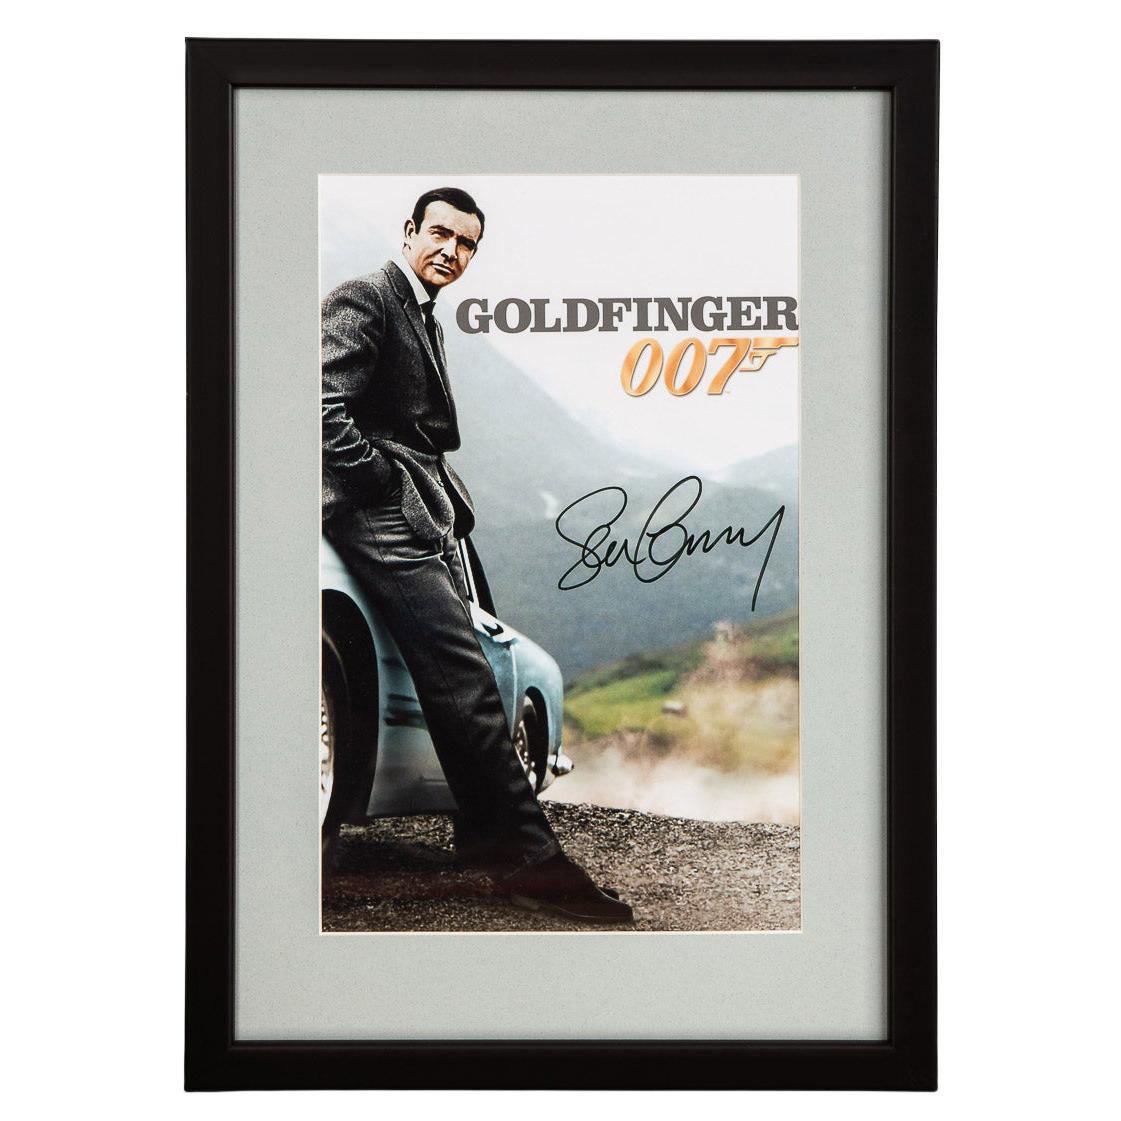 James Bond 007 Sean Connery Aston Martin Db5 Framed Photograph with Signature For Sale